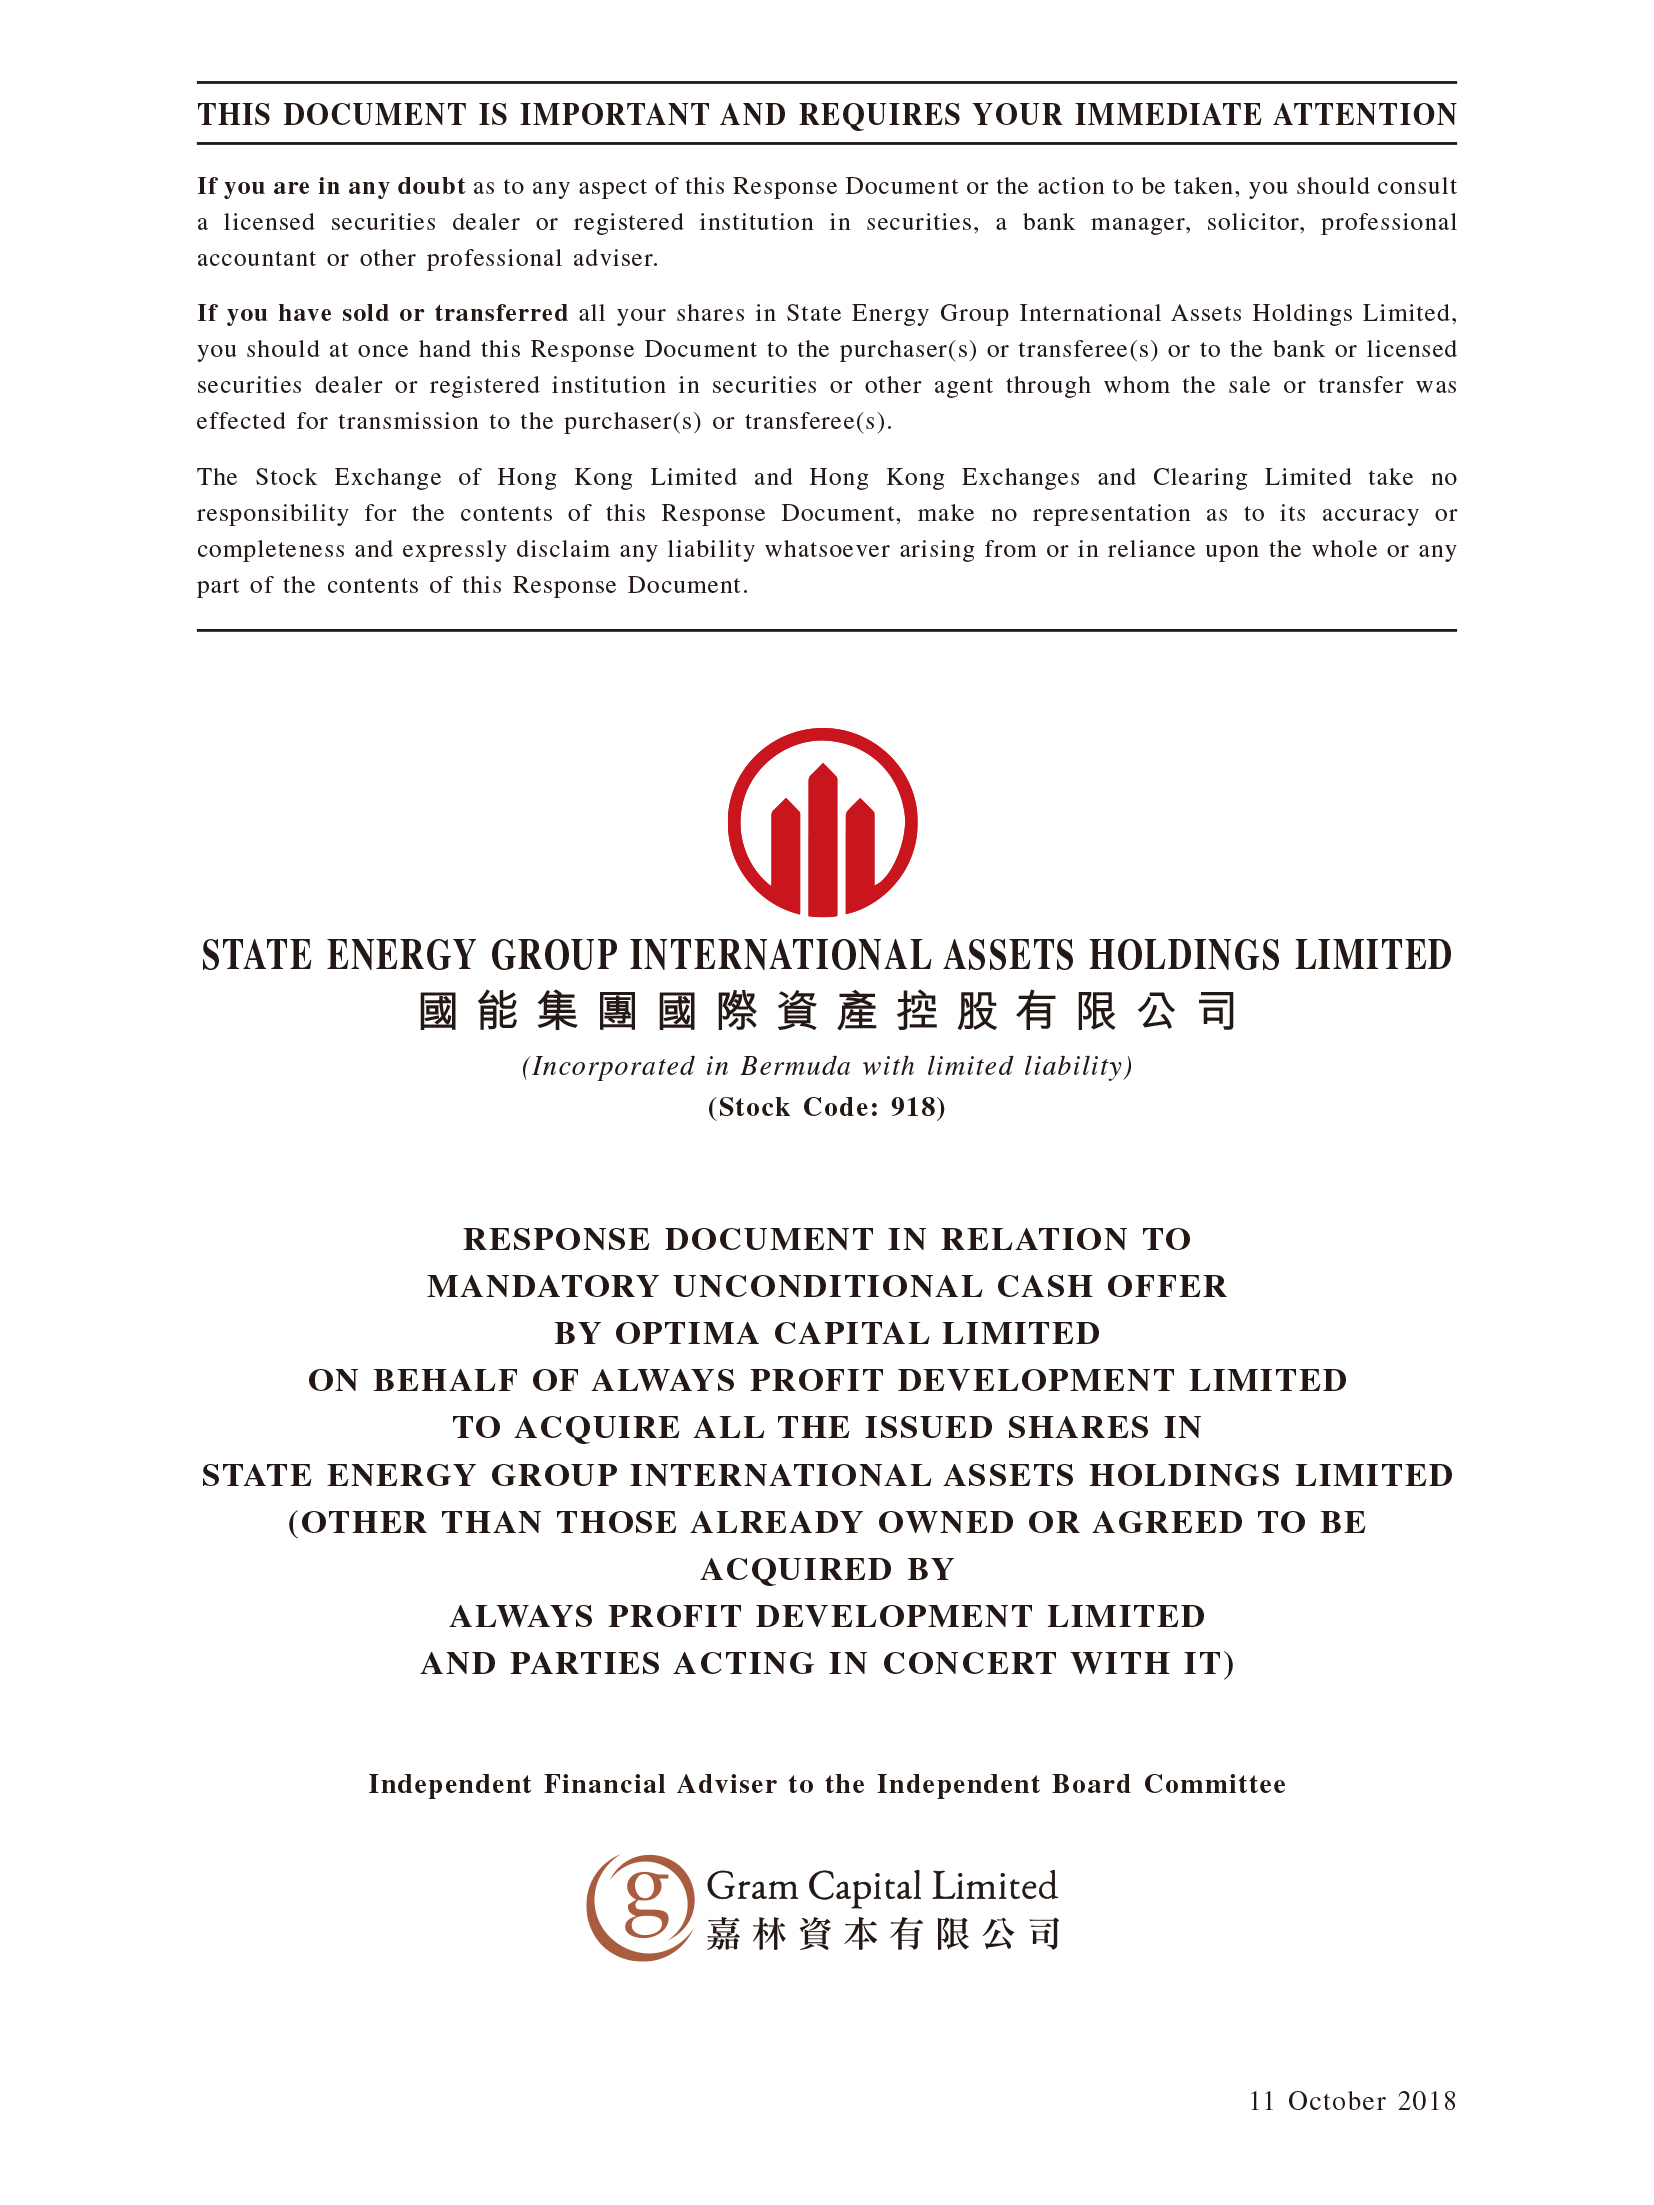 State Energy Group International Assets Holdings Limited